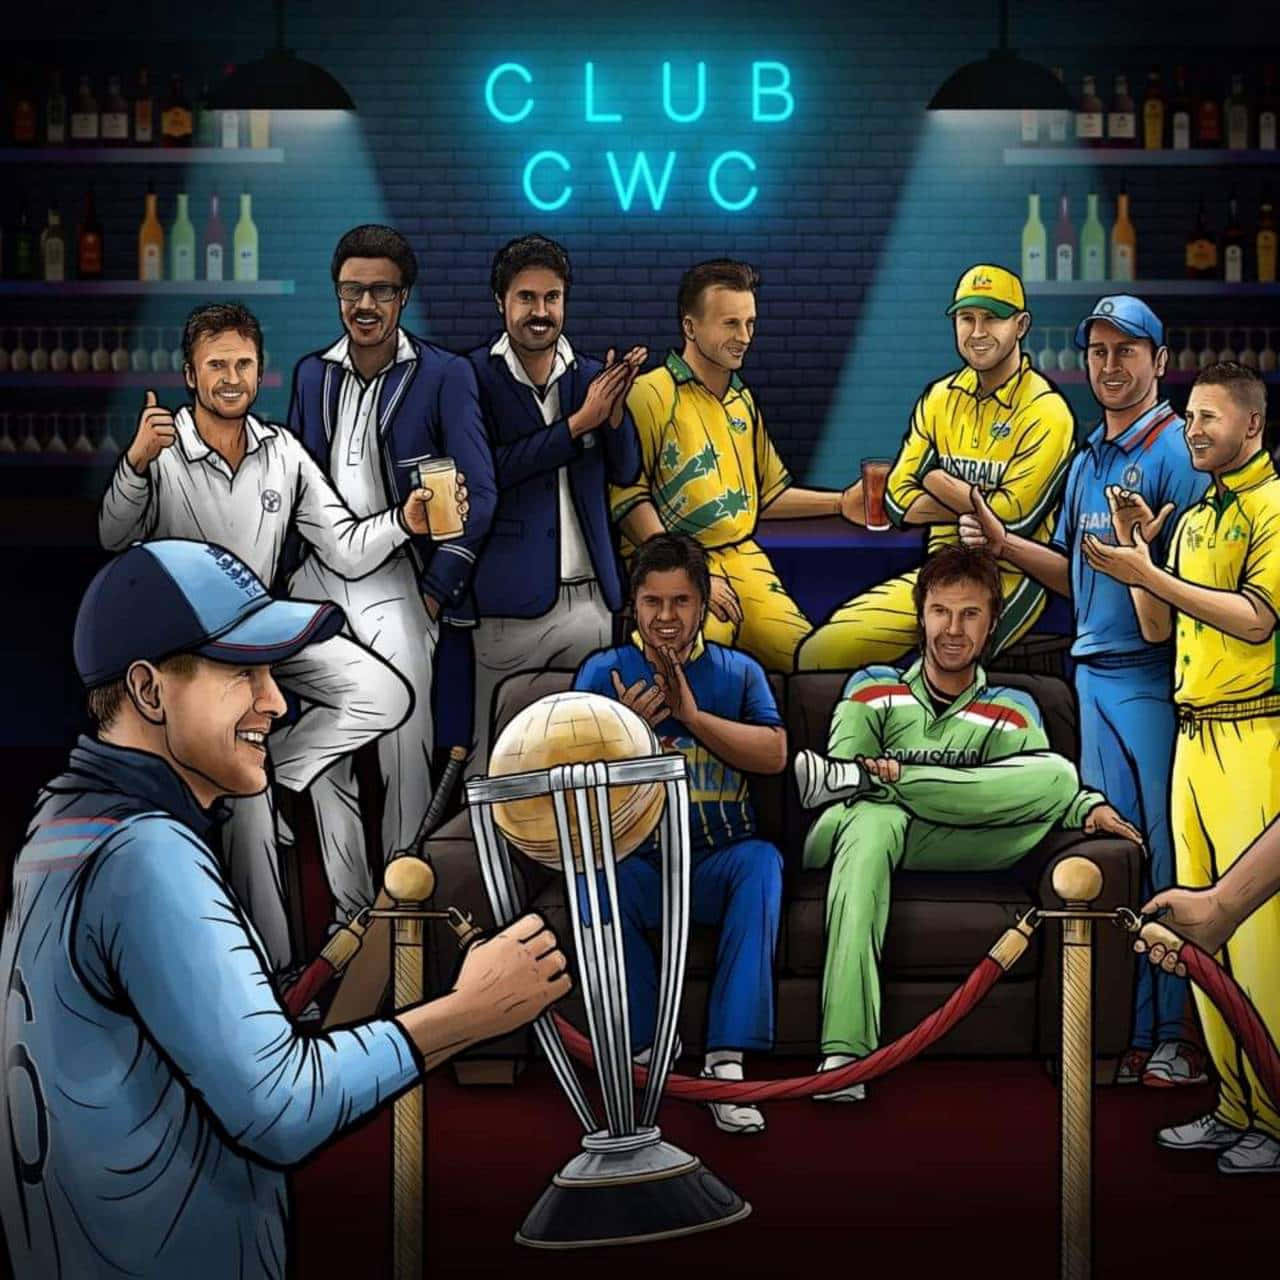 Club Cricket World Cup - A Group Of People In A Bar